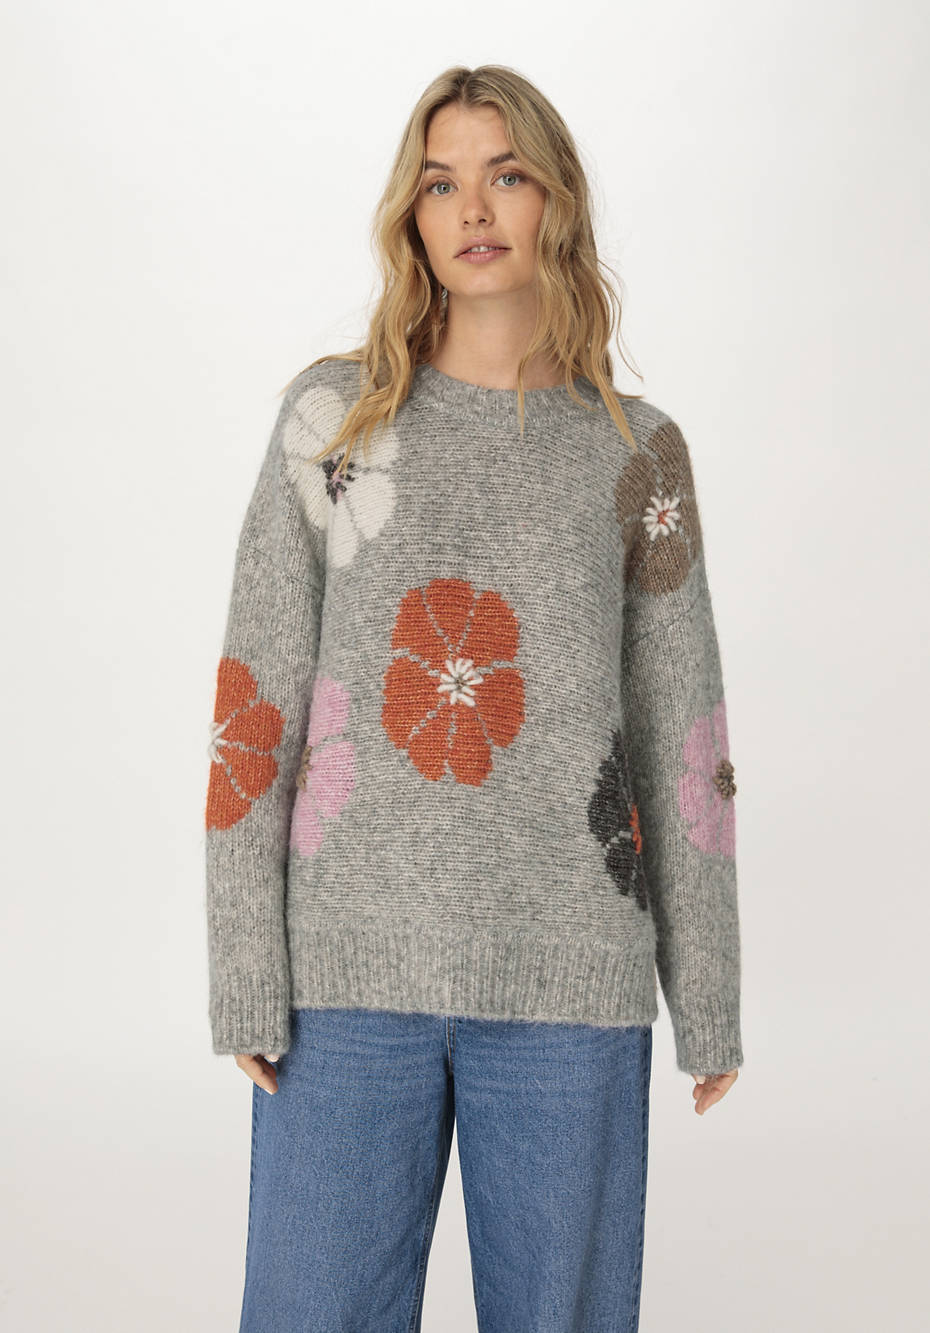 WUNDERKIND X HESSNATUR sweater made of alpaca with organic cotton